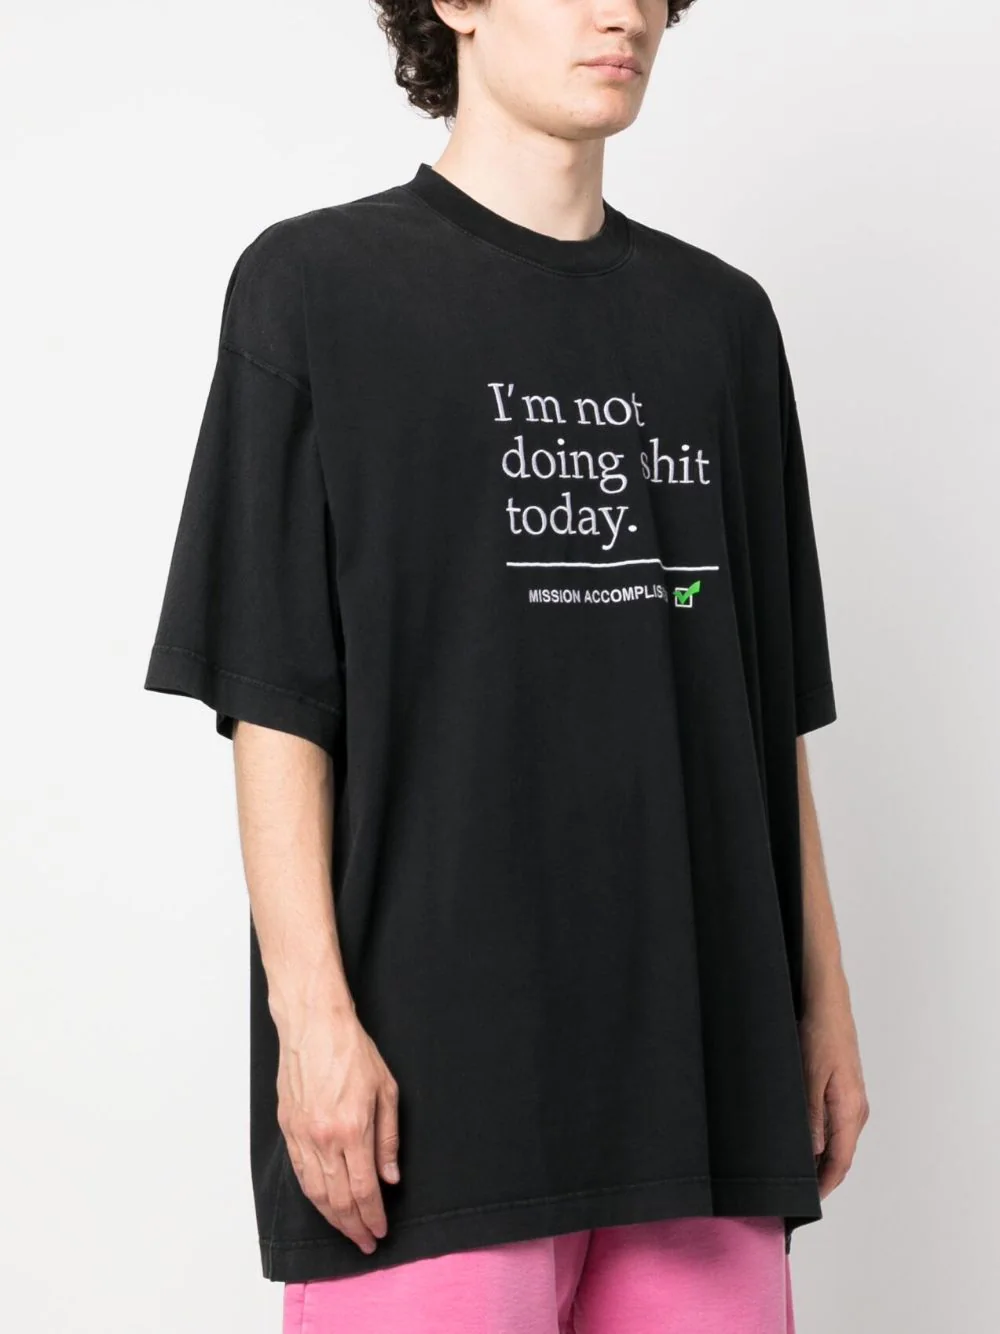 Black 'I'm Not Doing Shit Today' Sweatshirt by VETEMENTS on Sale